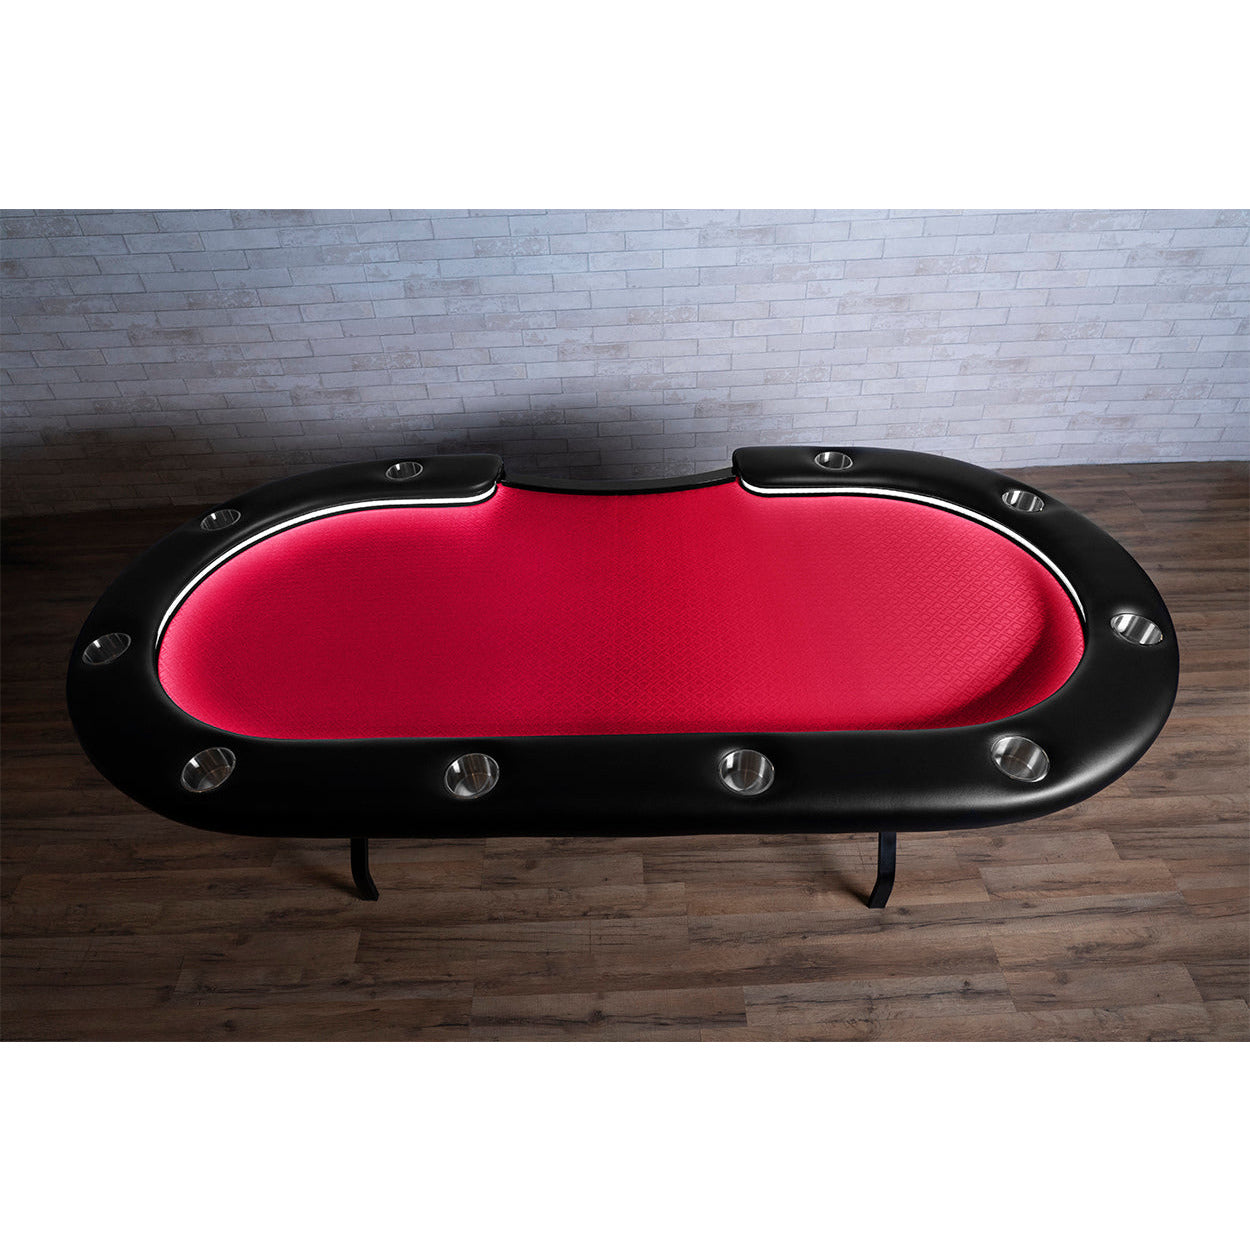 BBO The Aces Pro Alpha Folding Poker Table red speedcloth top view 